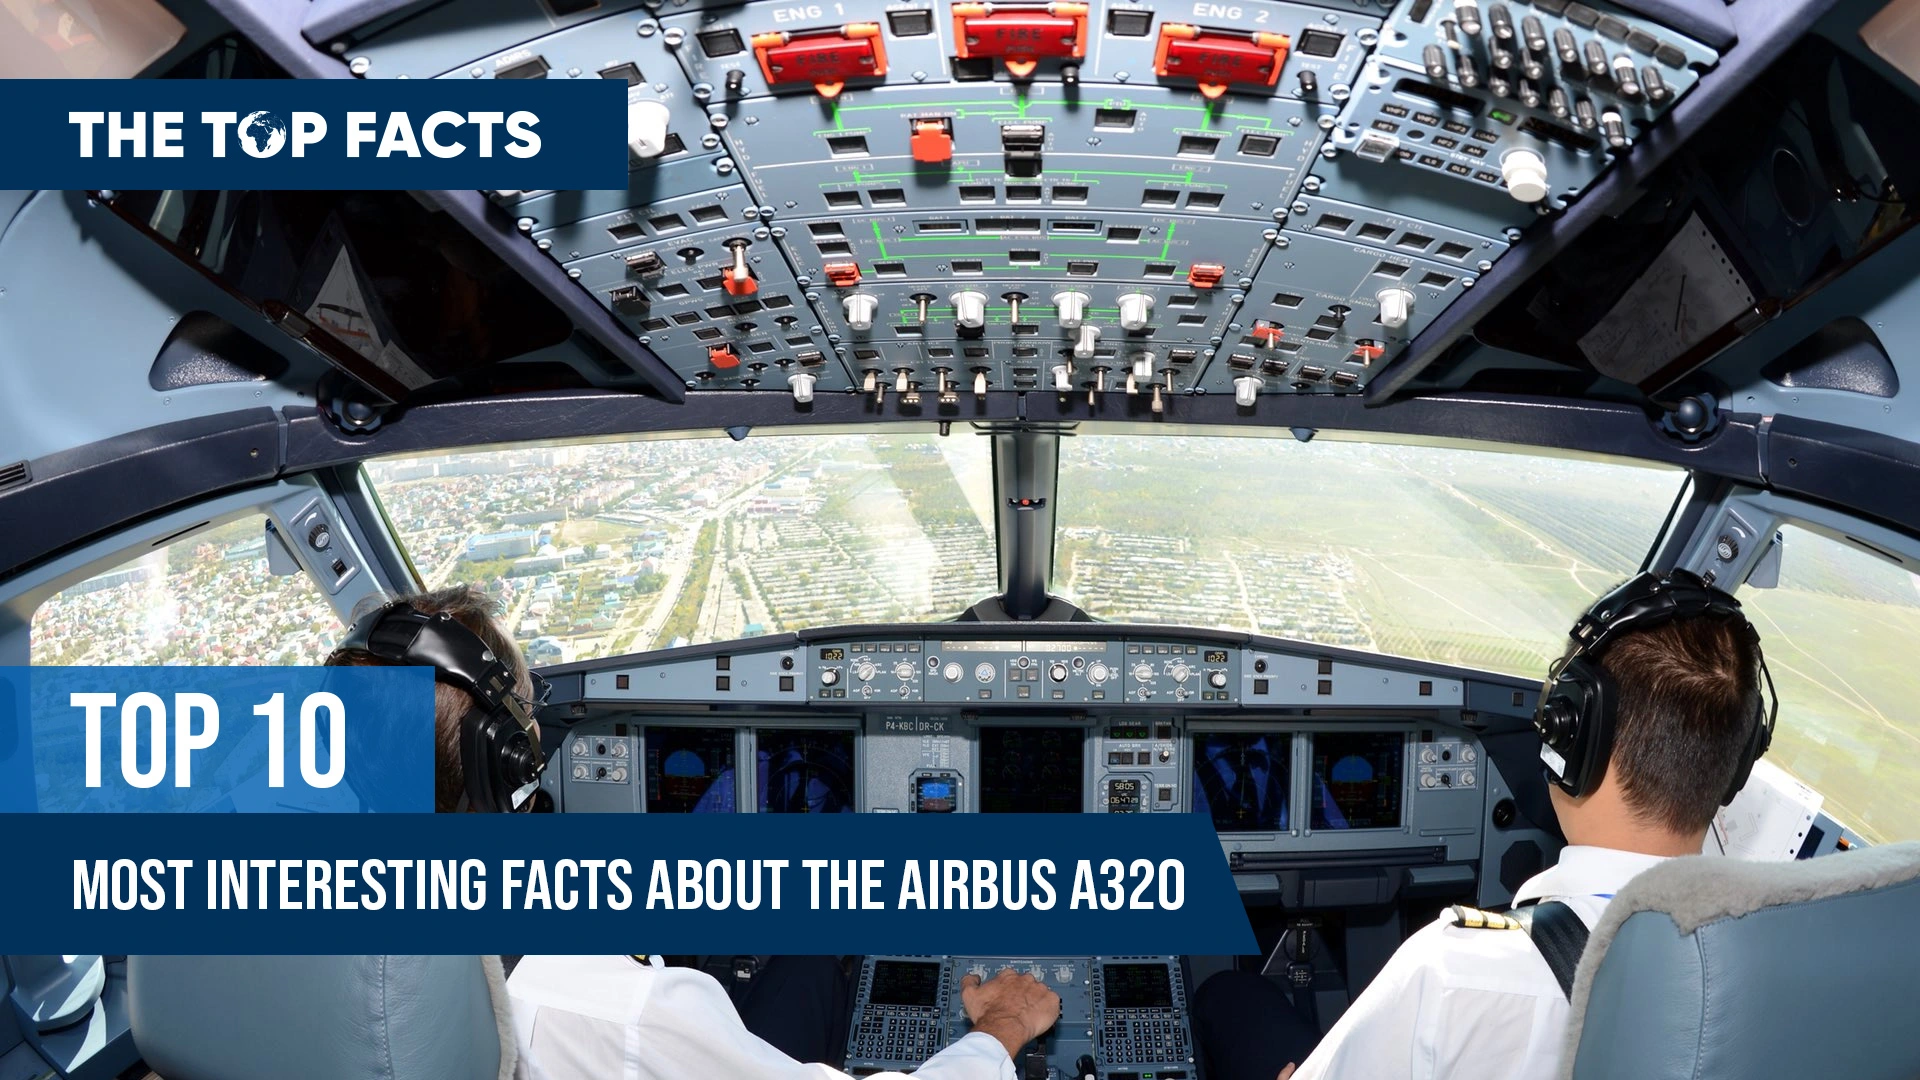 A list of the top 10 most interesting facts about the Airbus A320 aircraft.